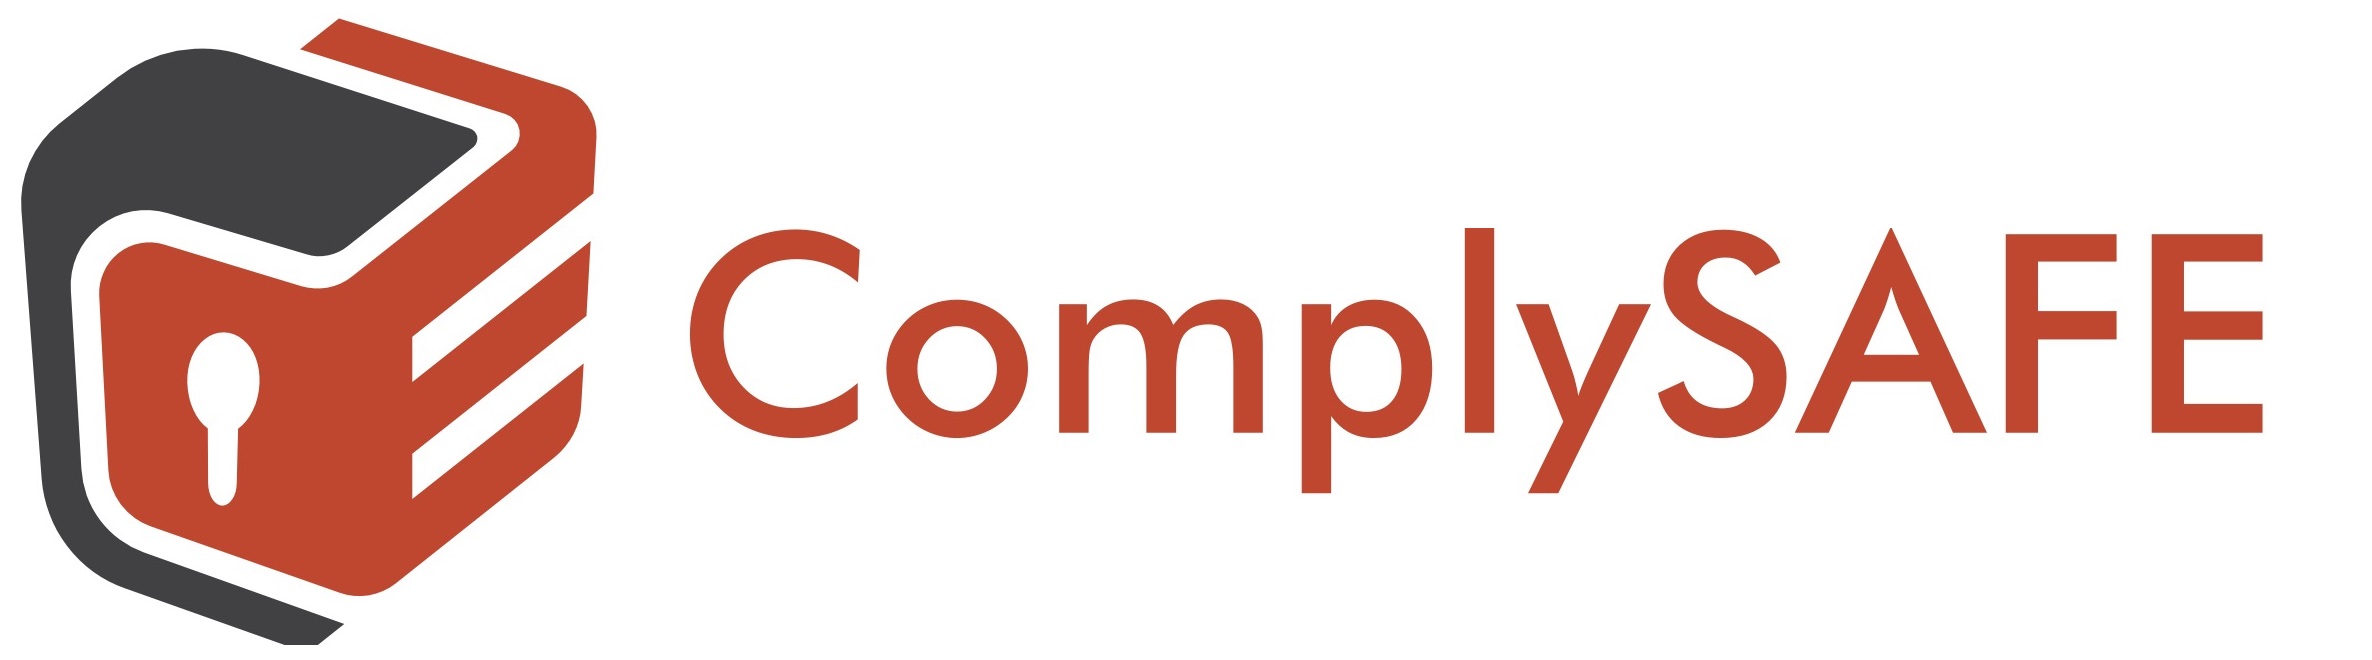 TERMS OF USE | ComplySAFE